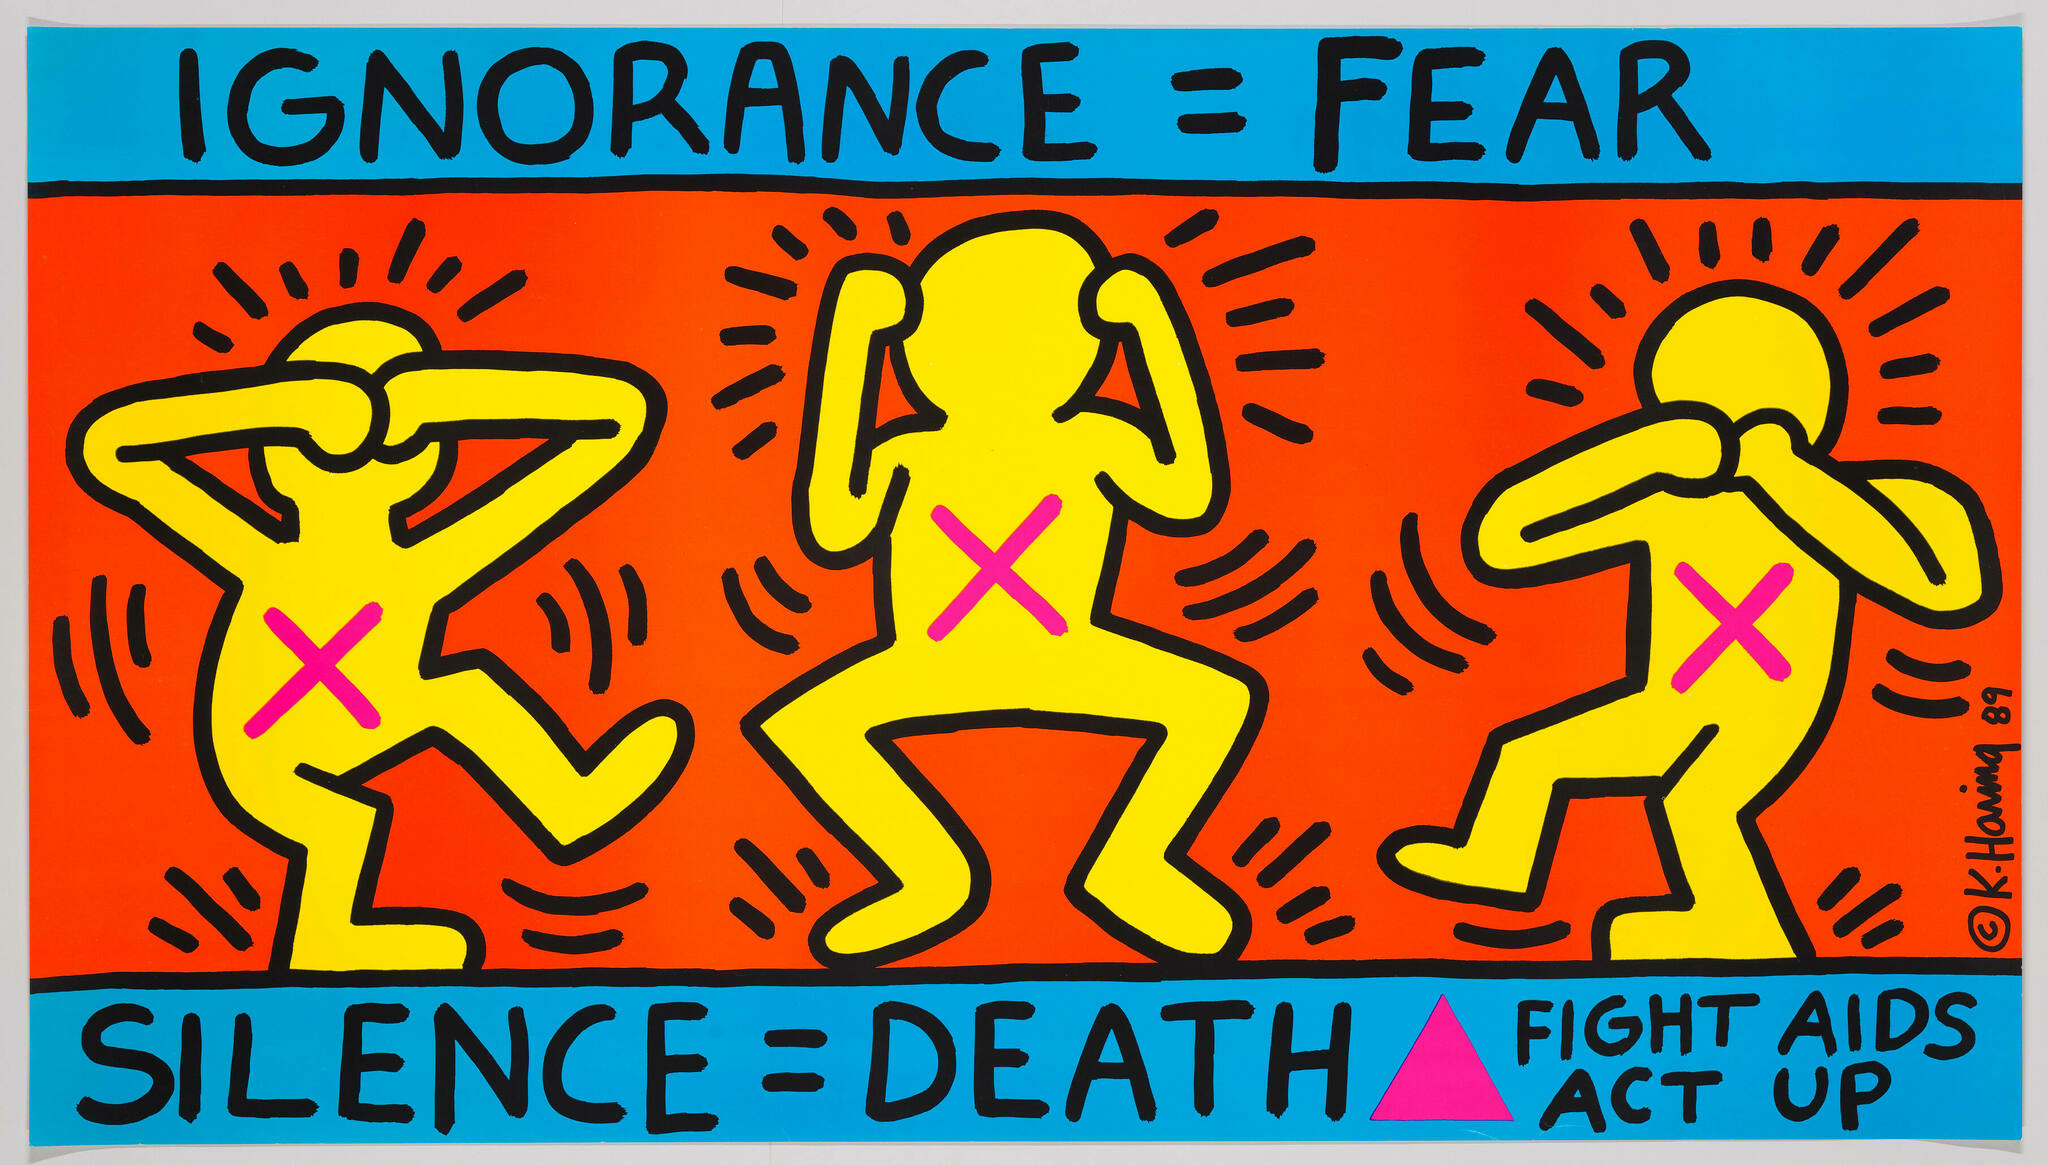 Keith Haring, Ignorance = Fear / Silence = Death, 1989. New York, Whitney Museum of American Ar